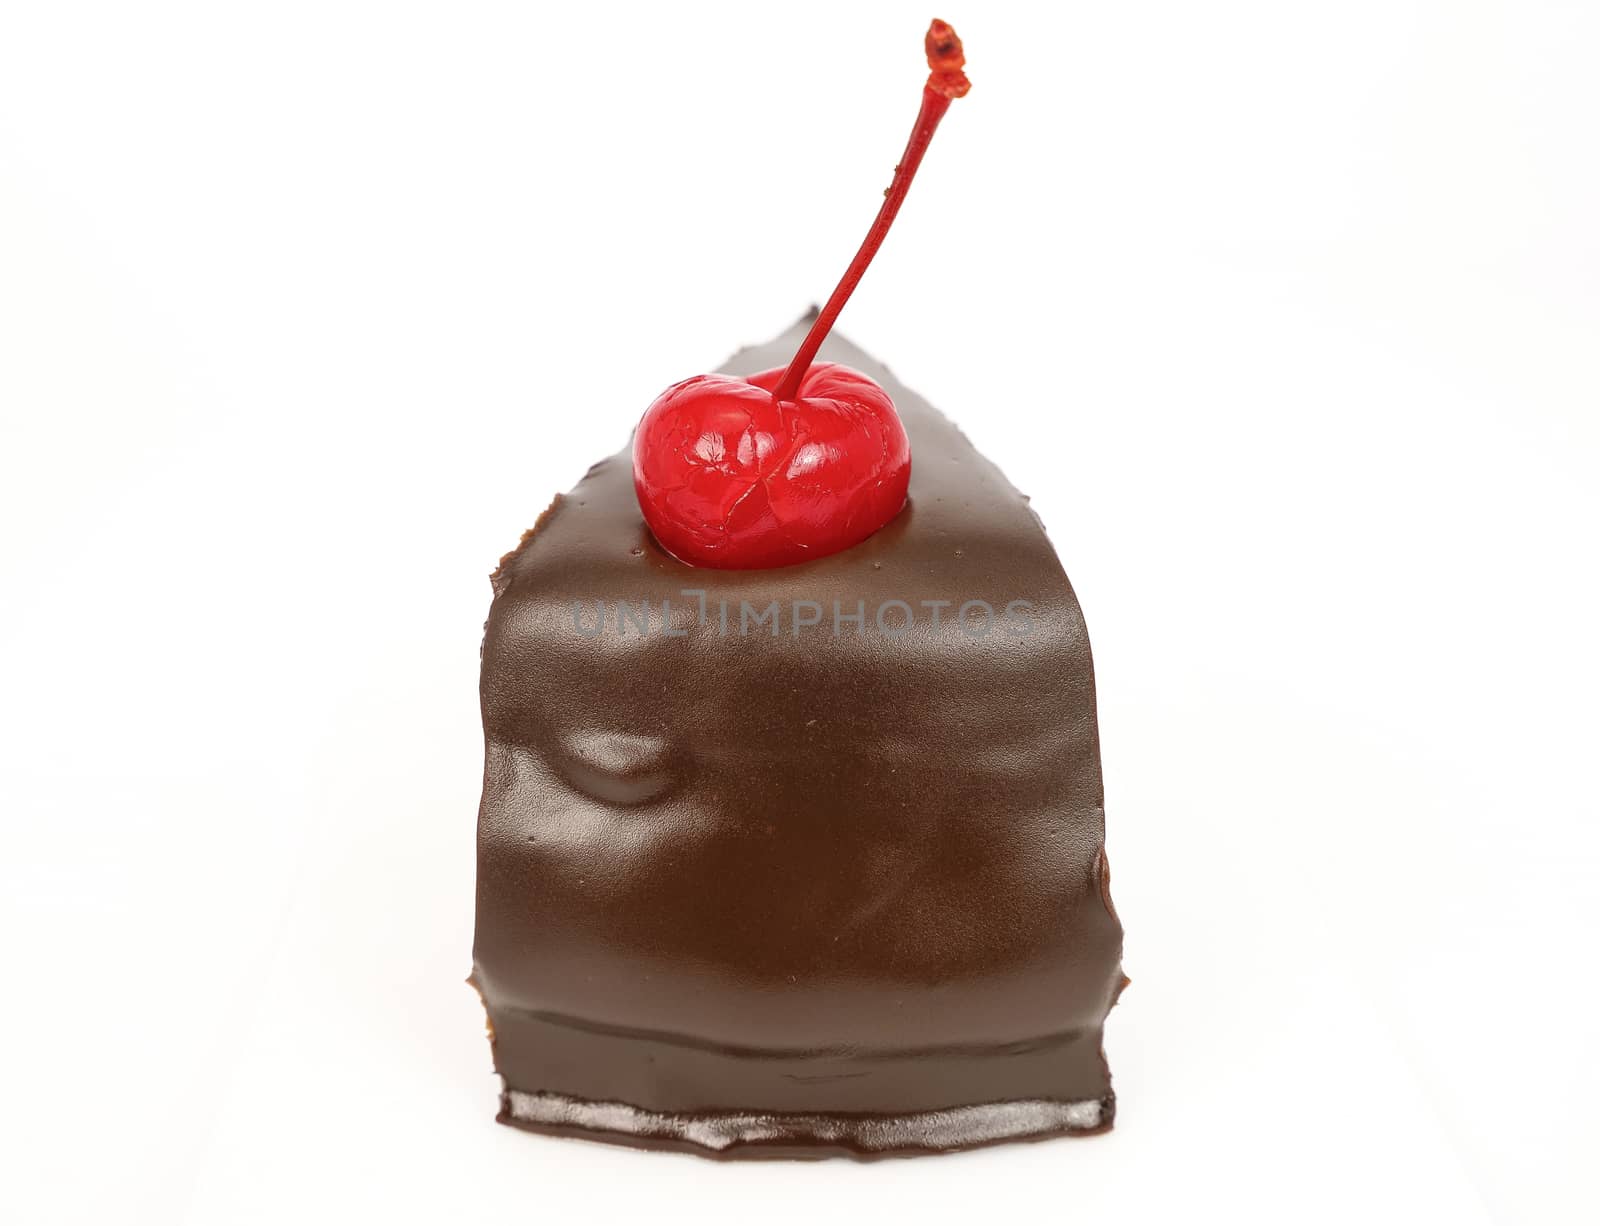 back view shot of a slice of chocolate cake with cherries and cream filling and chocolate fudge ( black forest cake) , isolated on white background